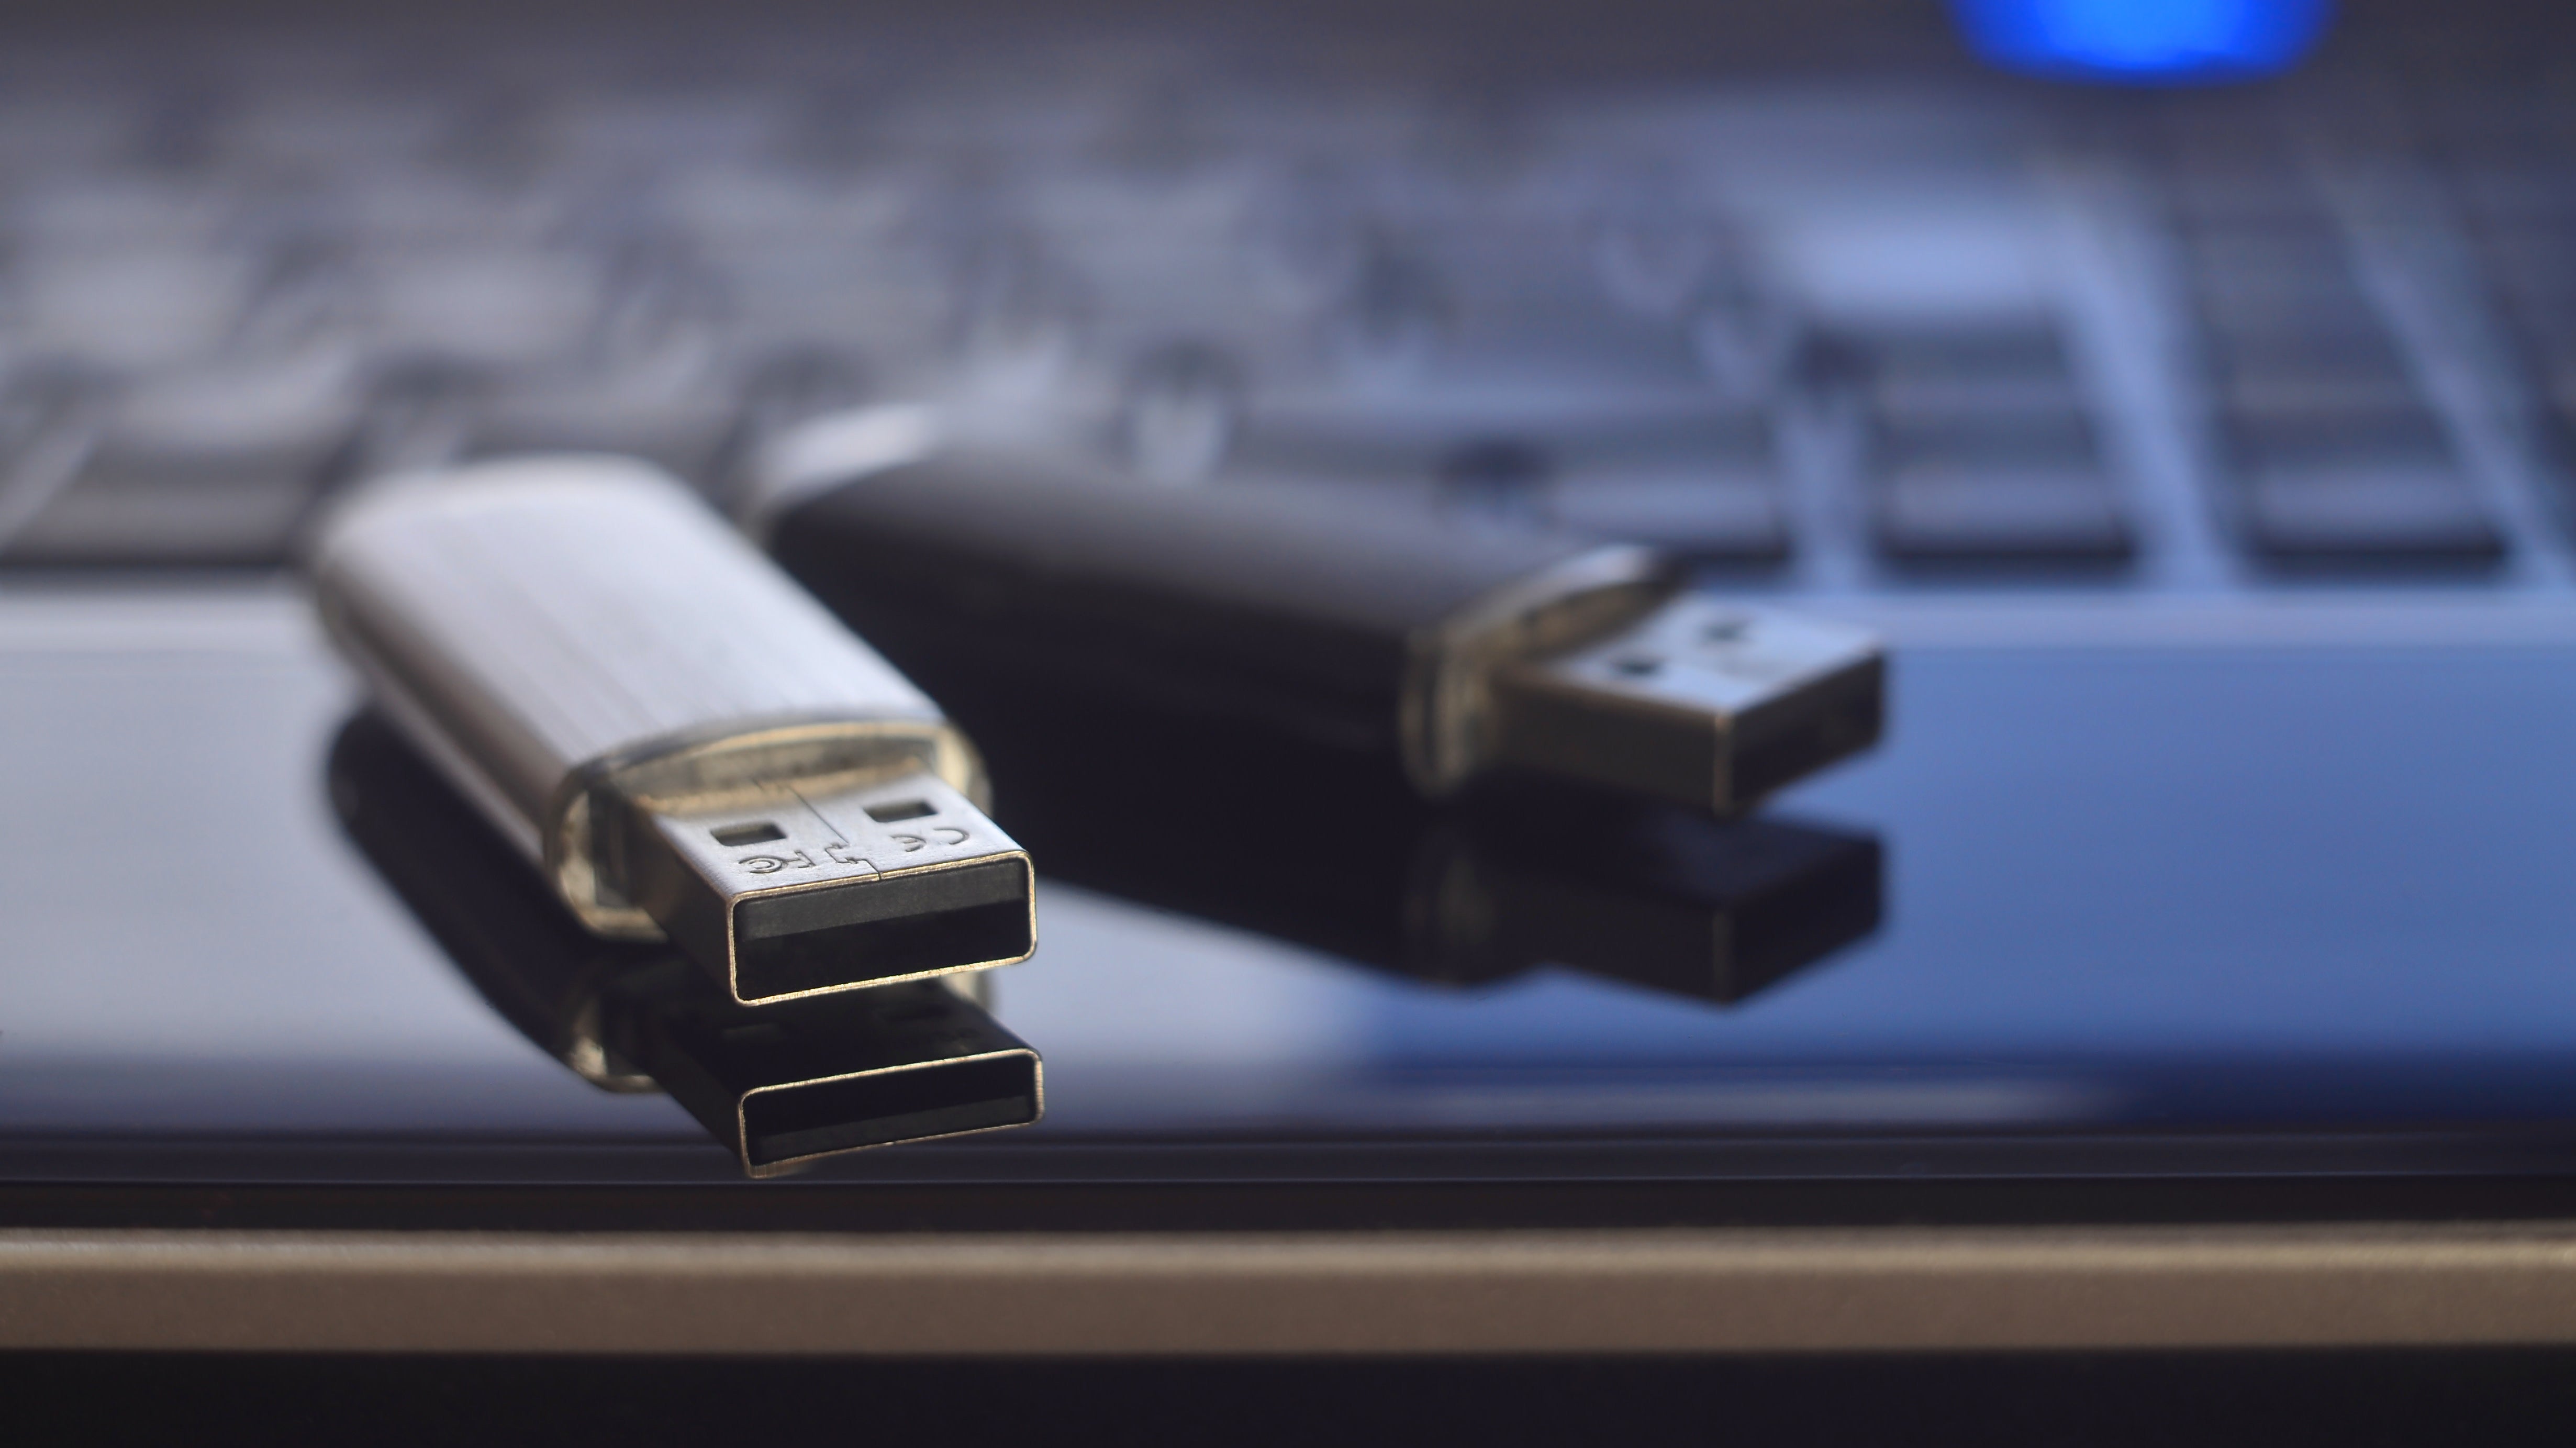 How To Check Your USB Devices For Unsafe Firmware